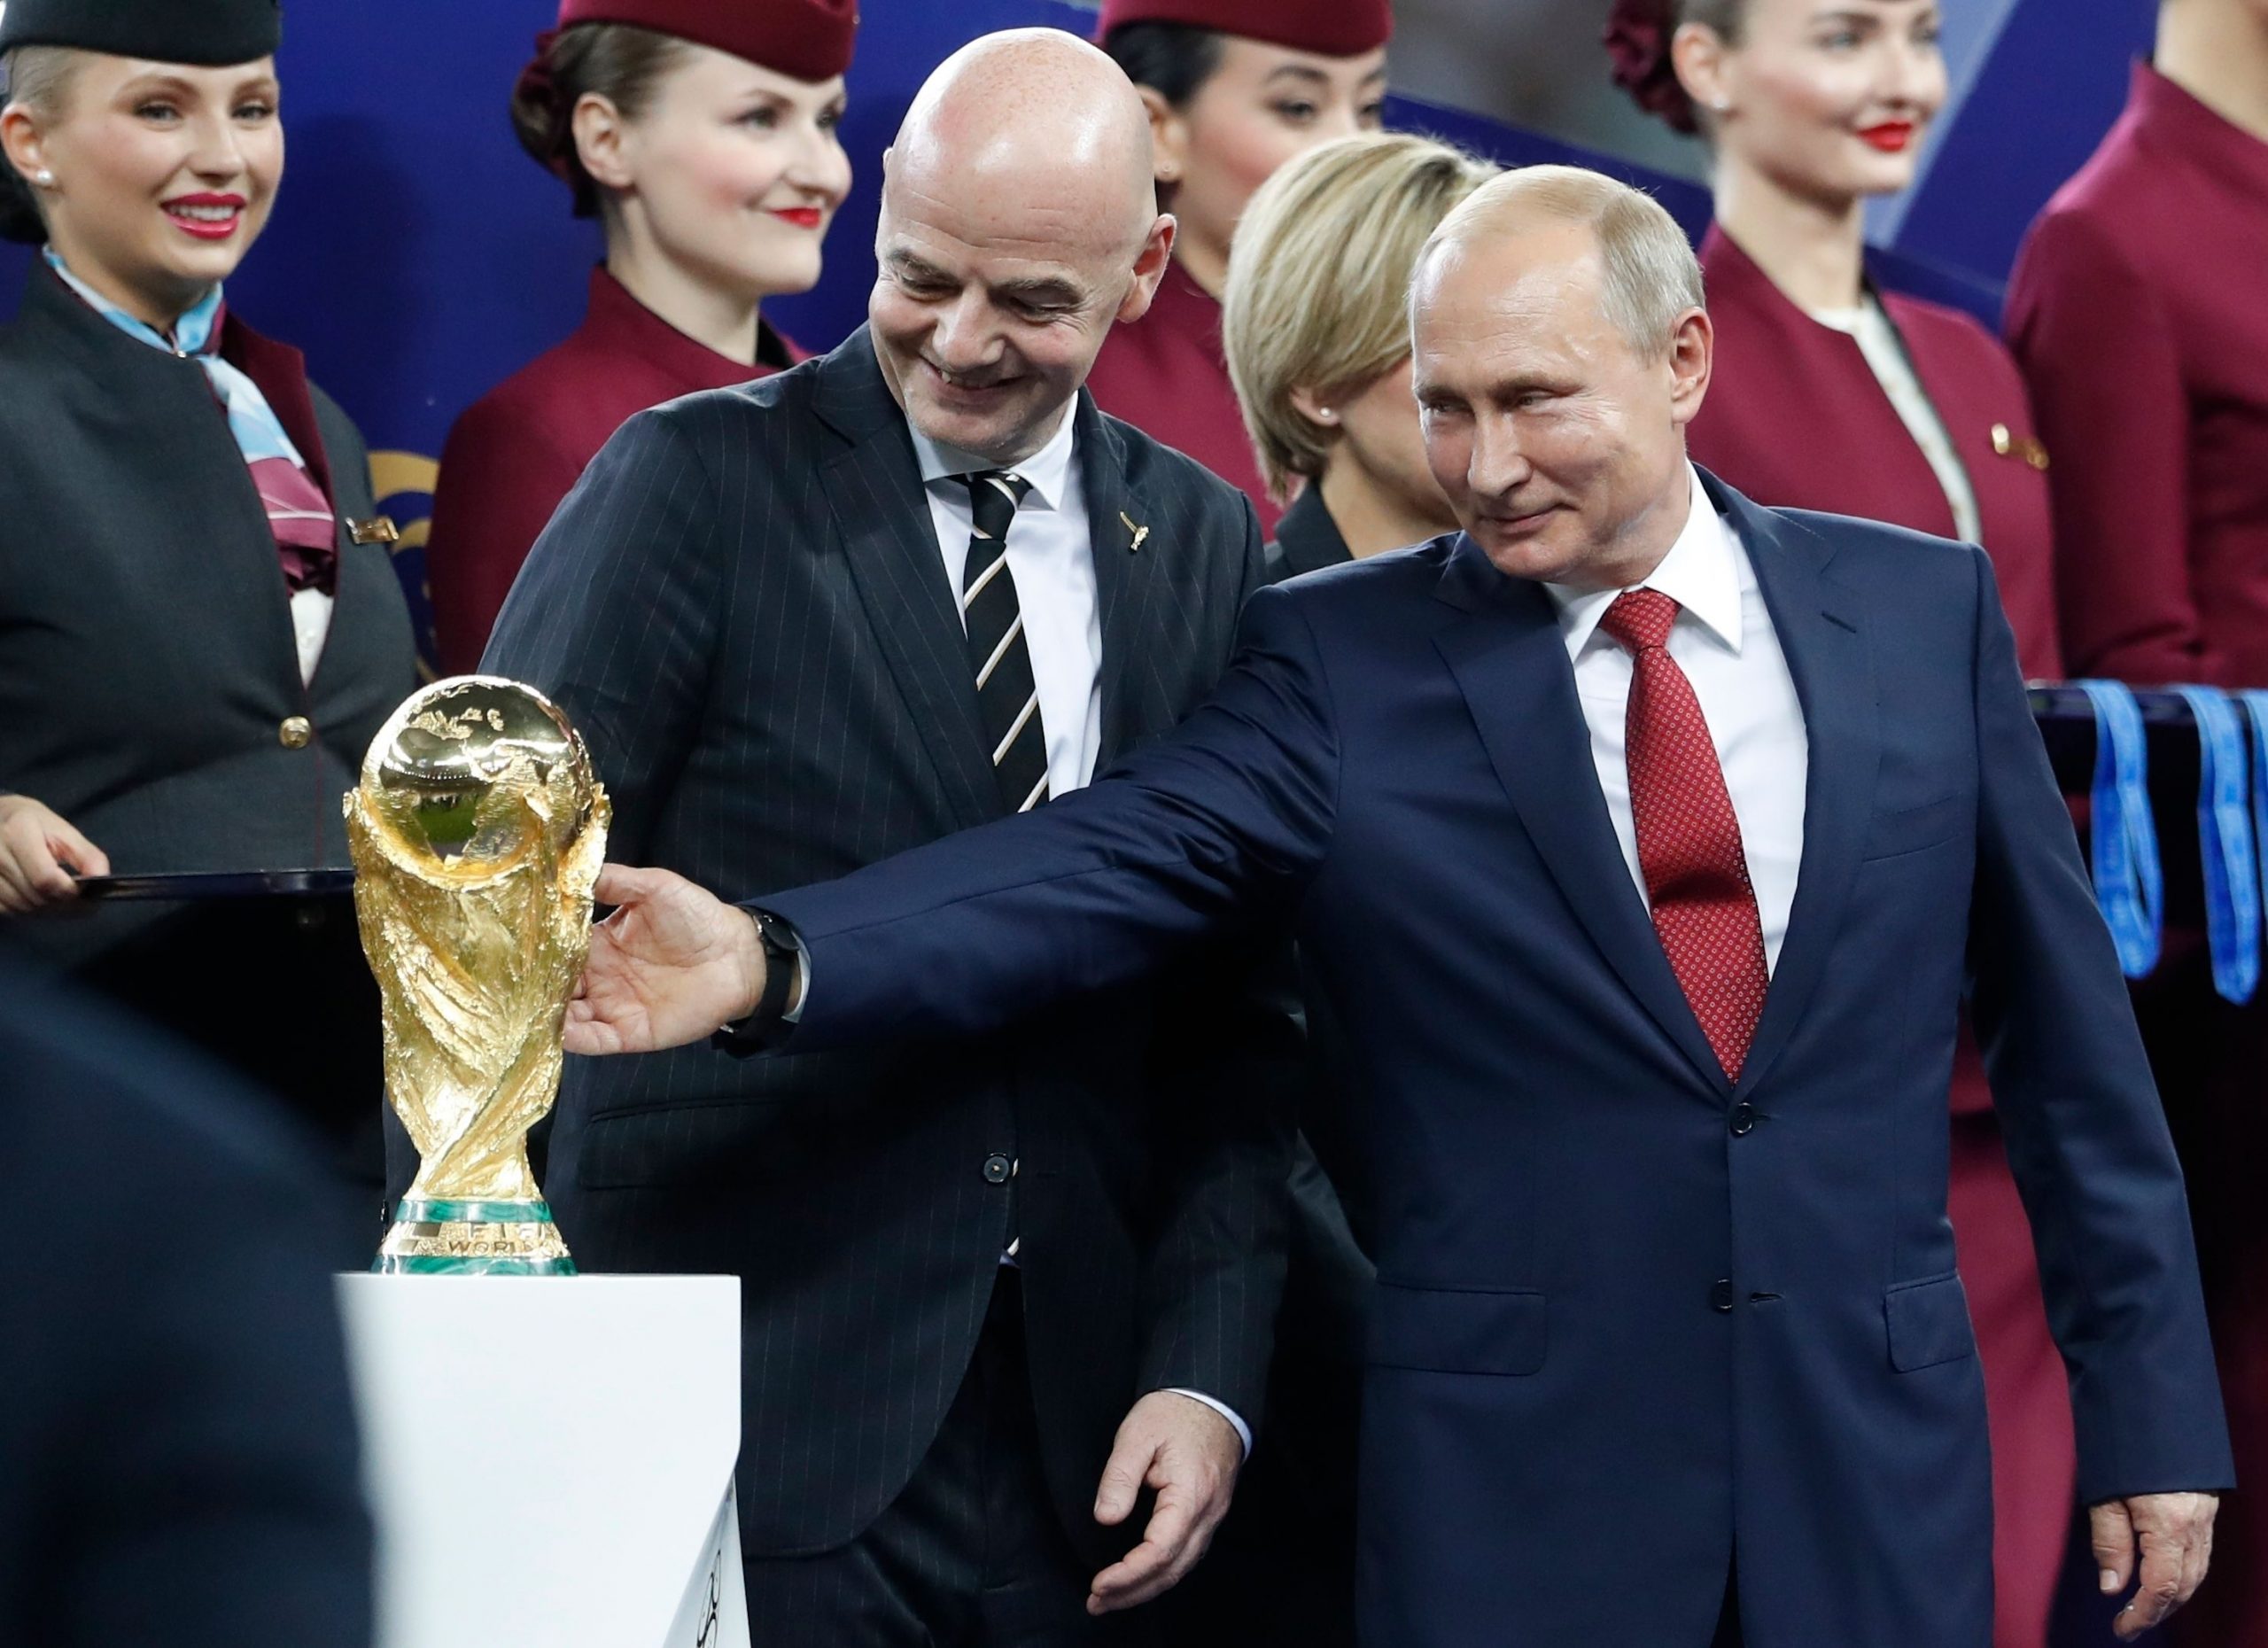 Russia Football Union to appeal FIFA, UEFA’s decision to ban national team